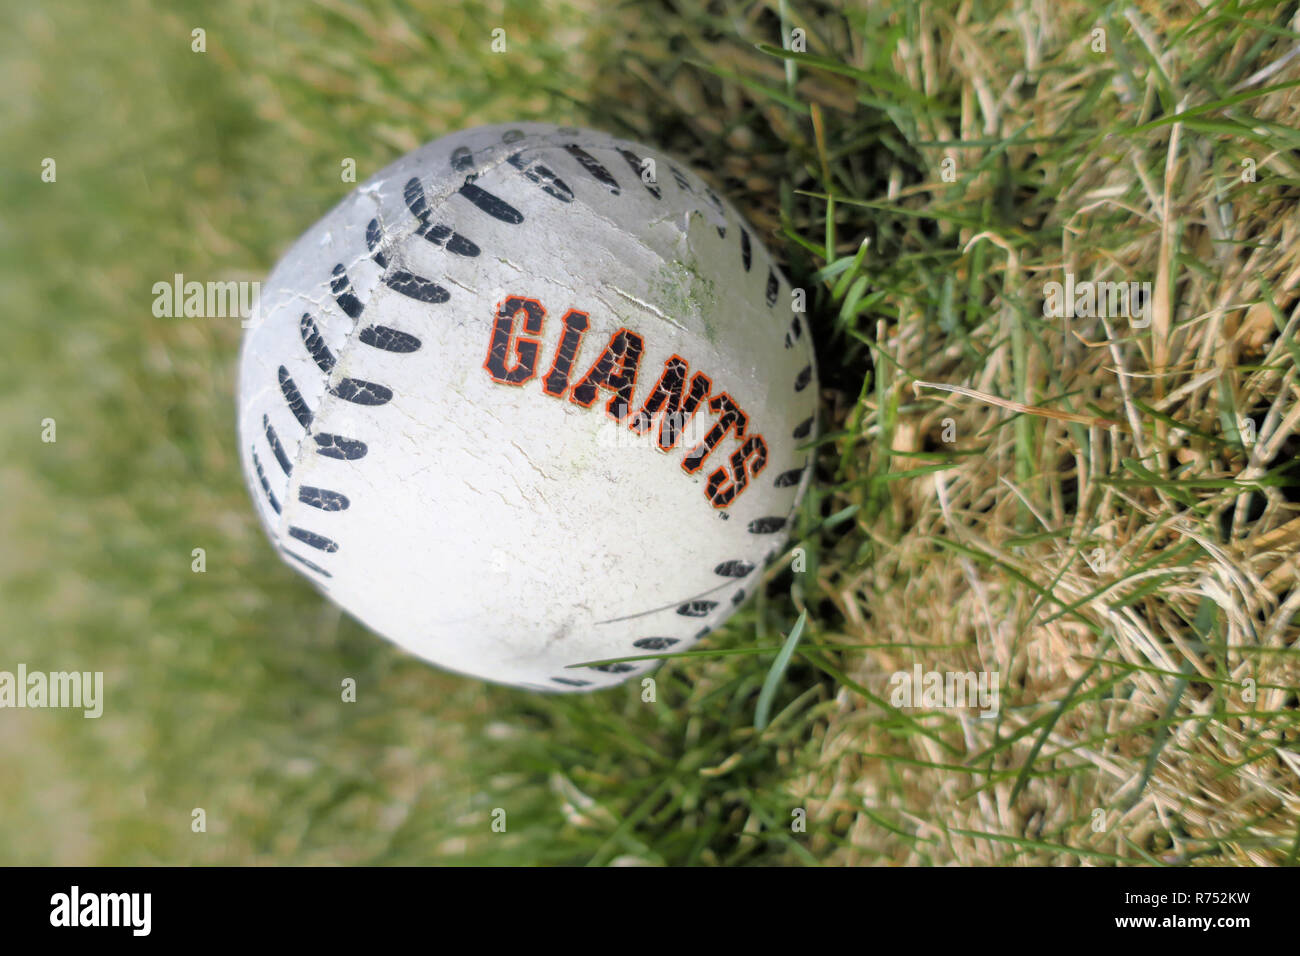 A san franciso giants baseball lying in the grass. Stock Photo